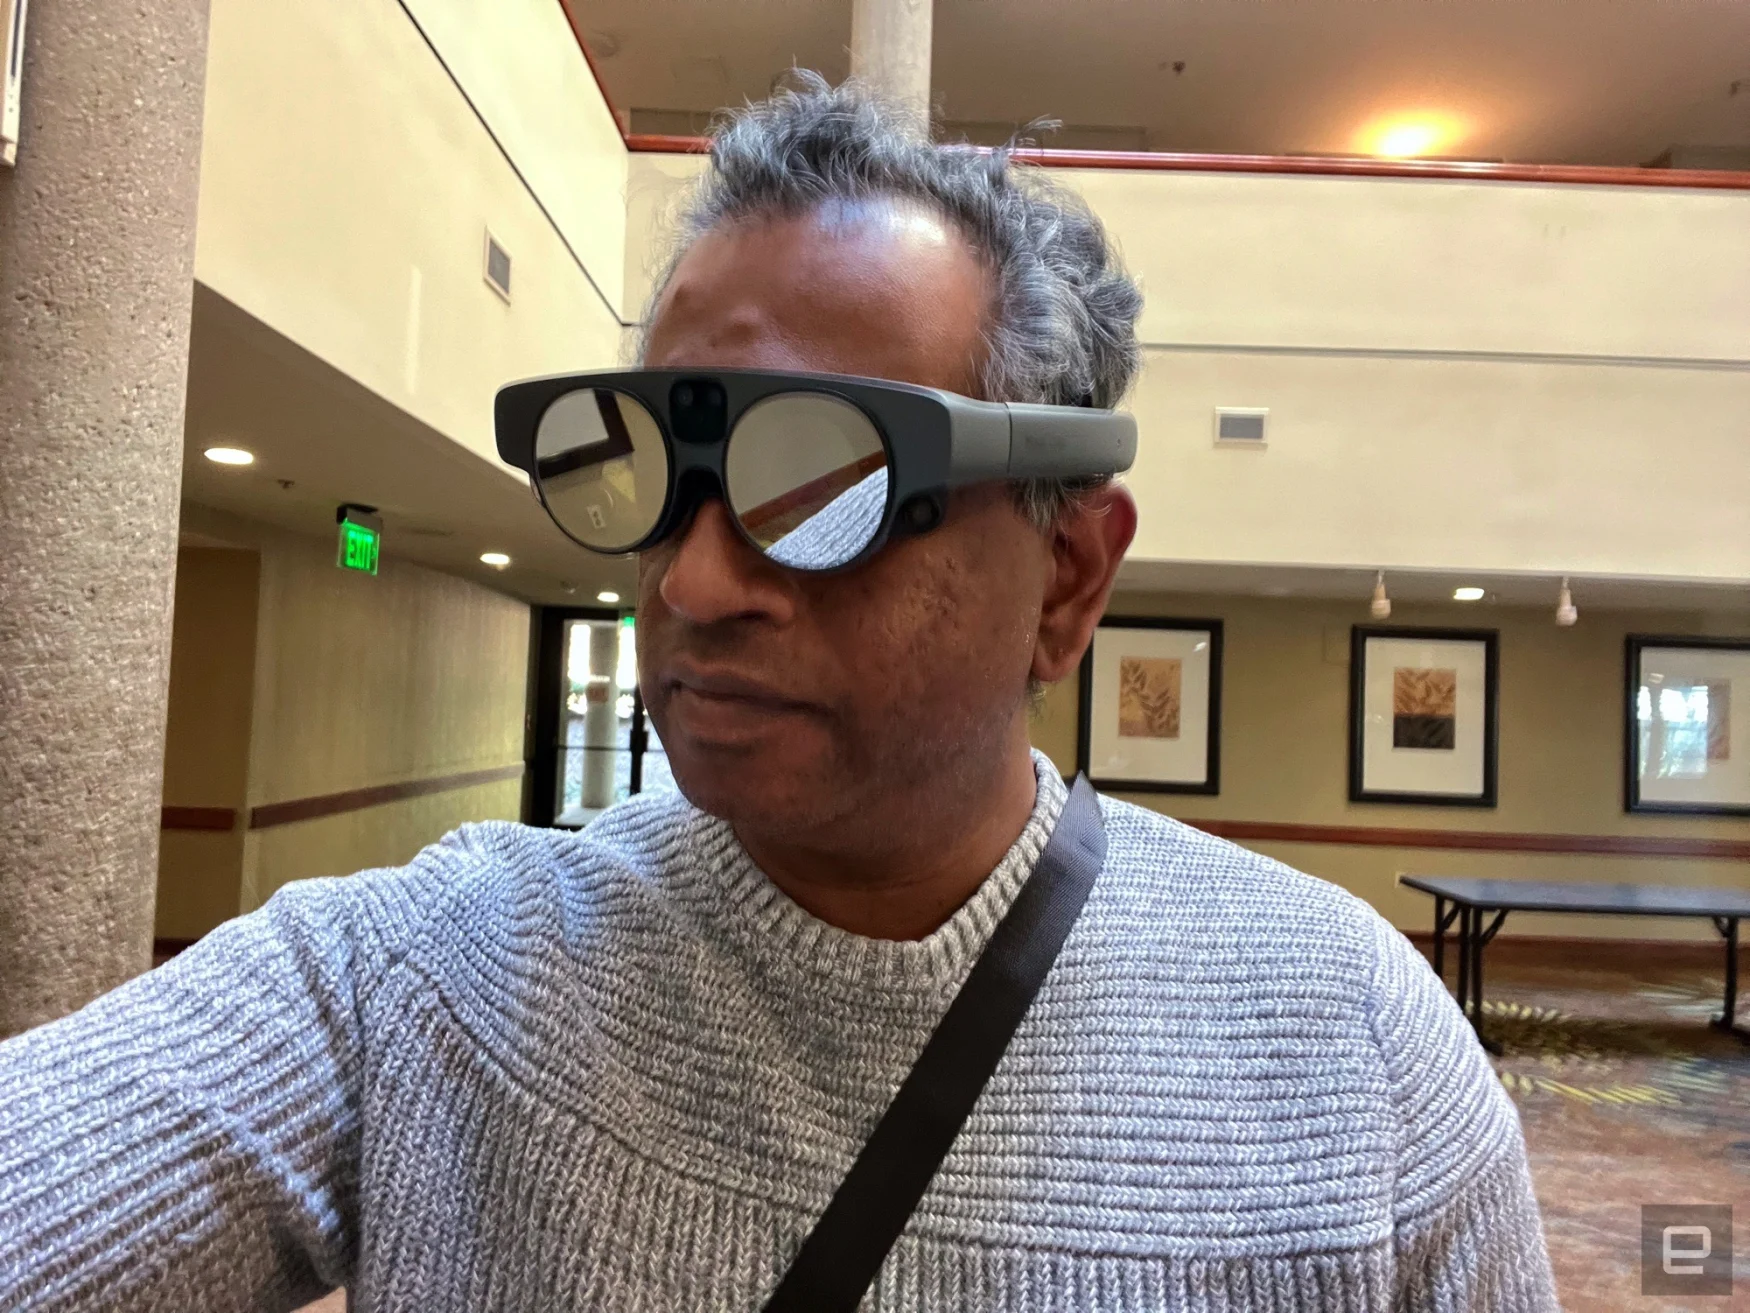 Wearing the Magic Leap 2 goggles